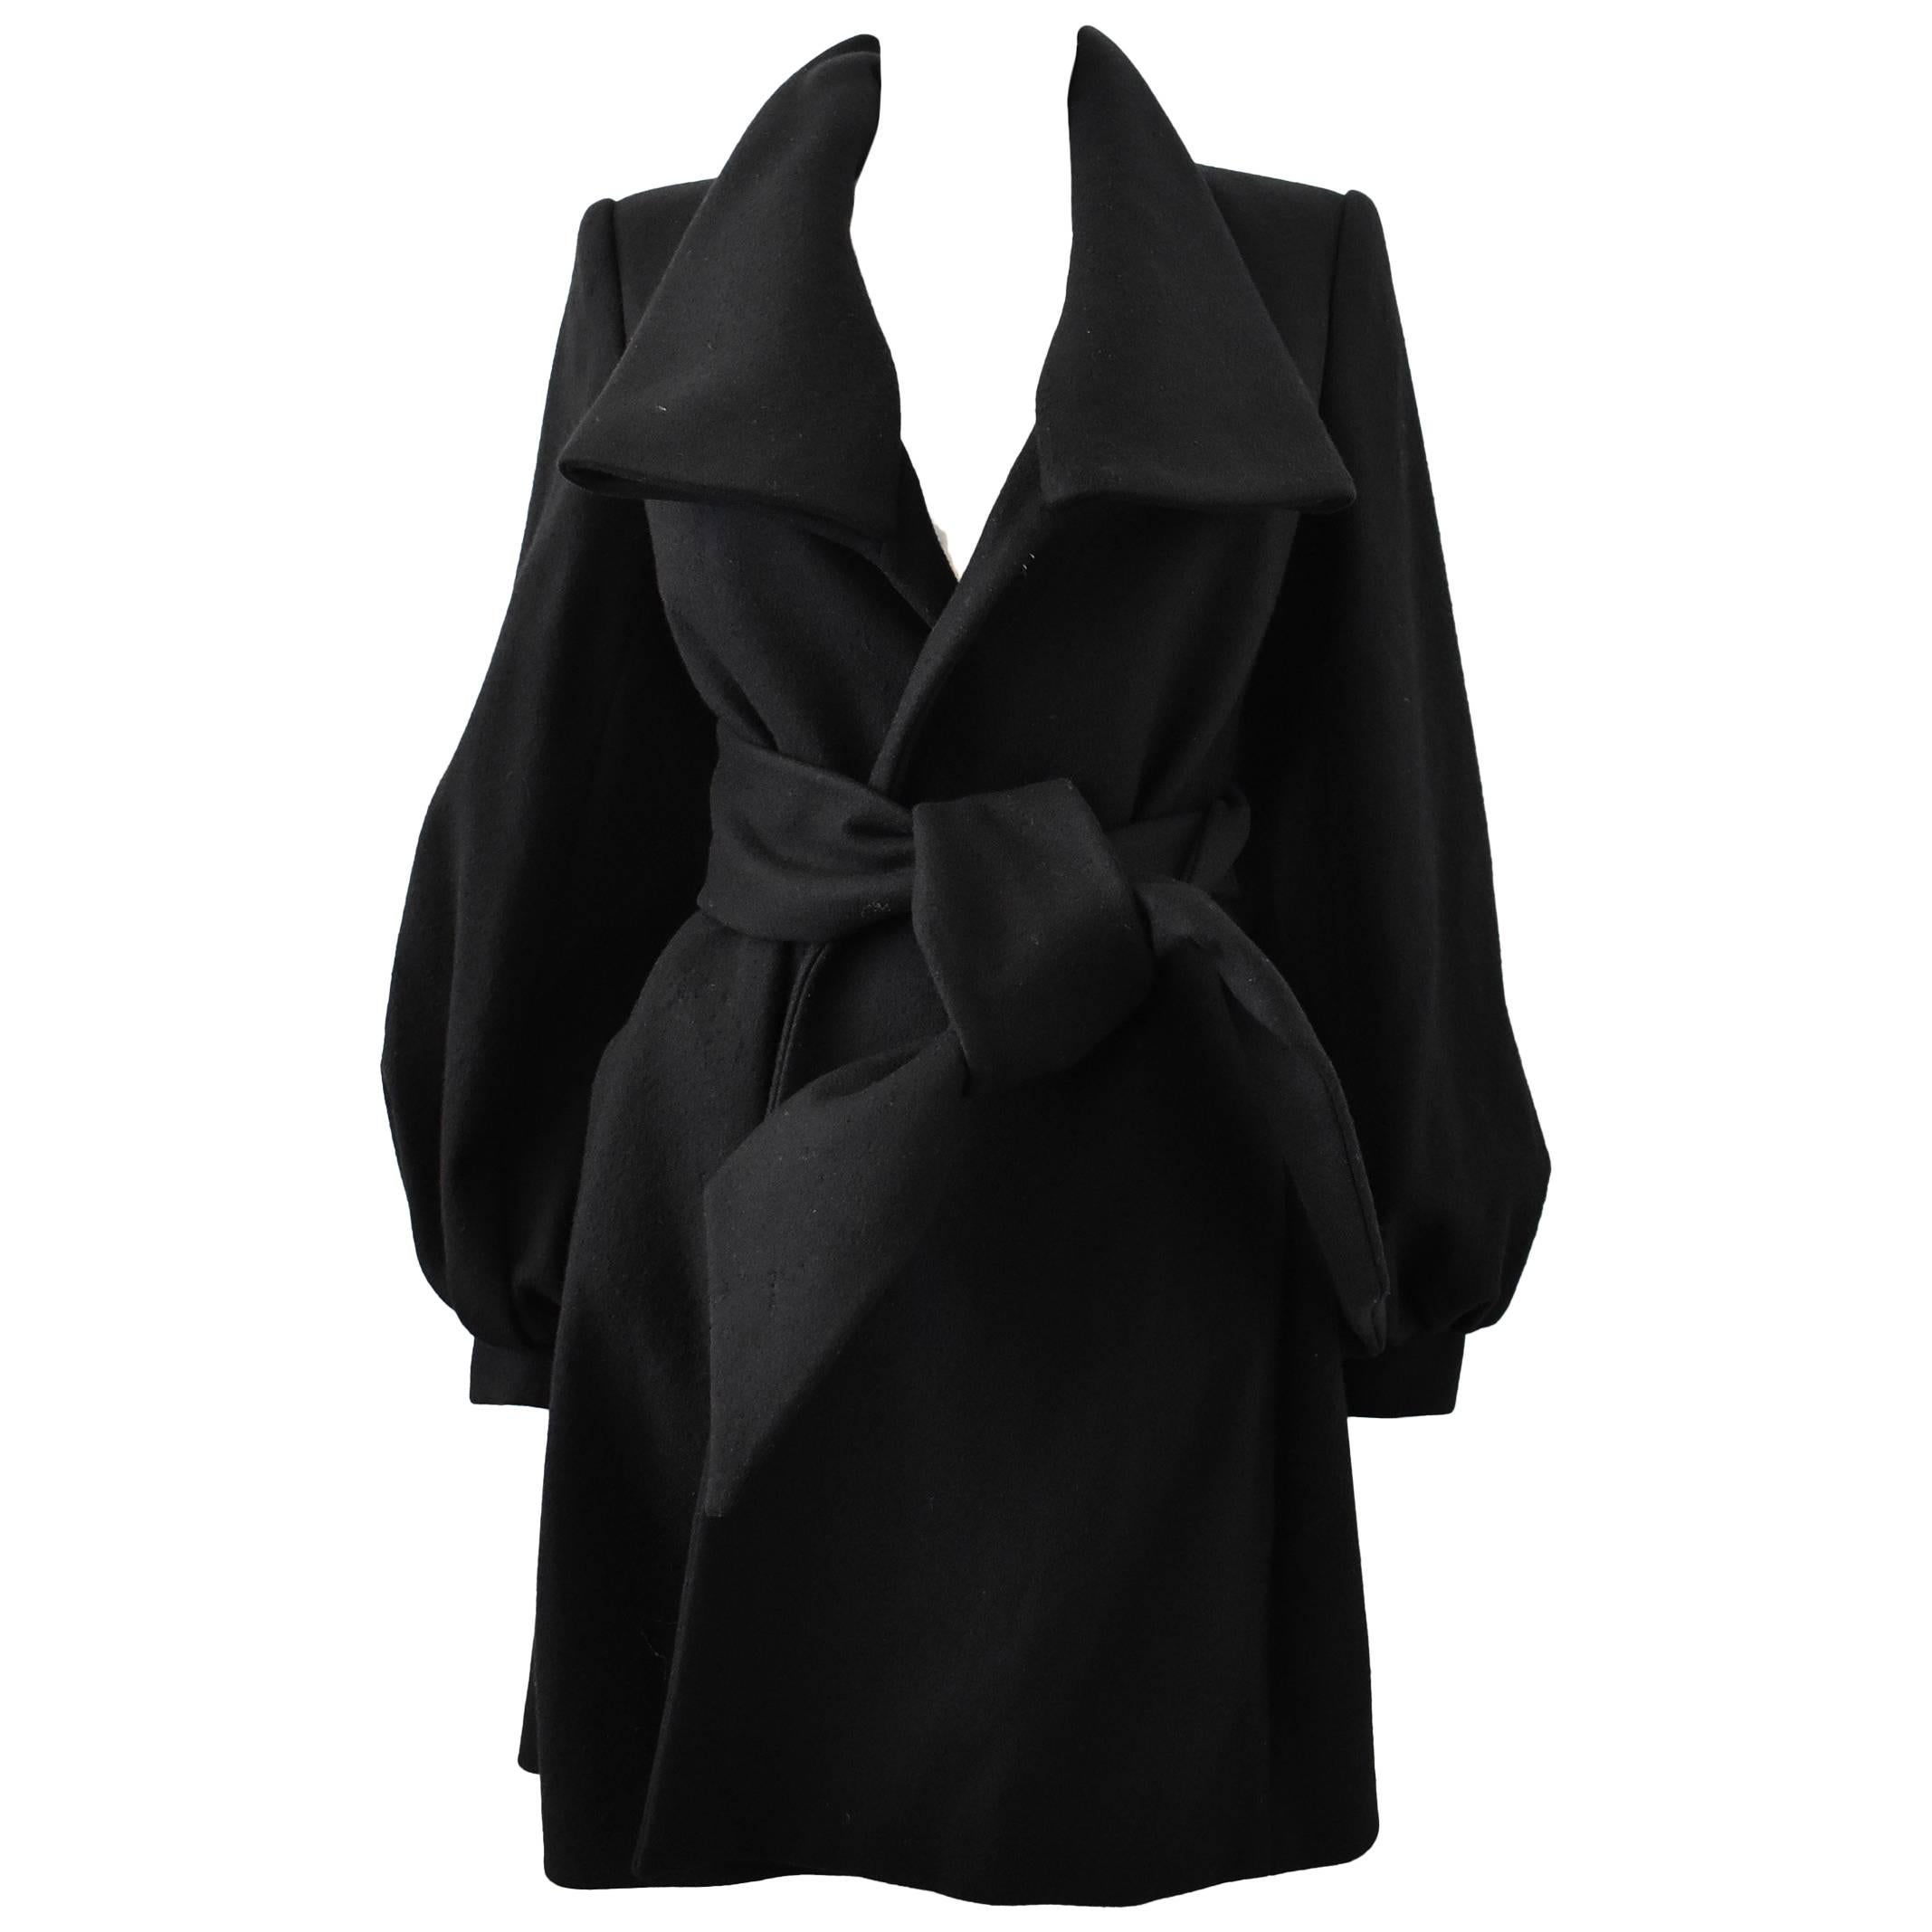 Stella McCartney Black Cashmere Coat with Bell Sleeves and Tie-Waist